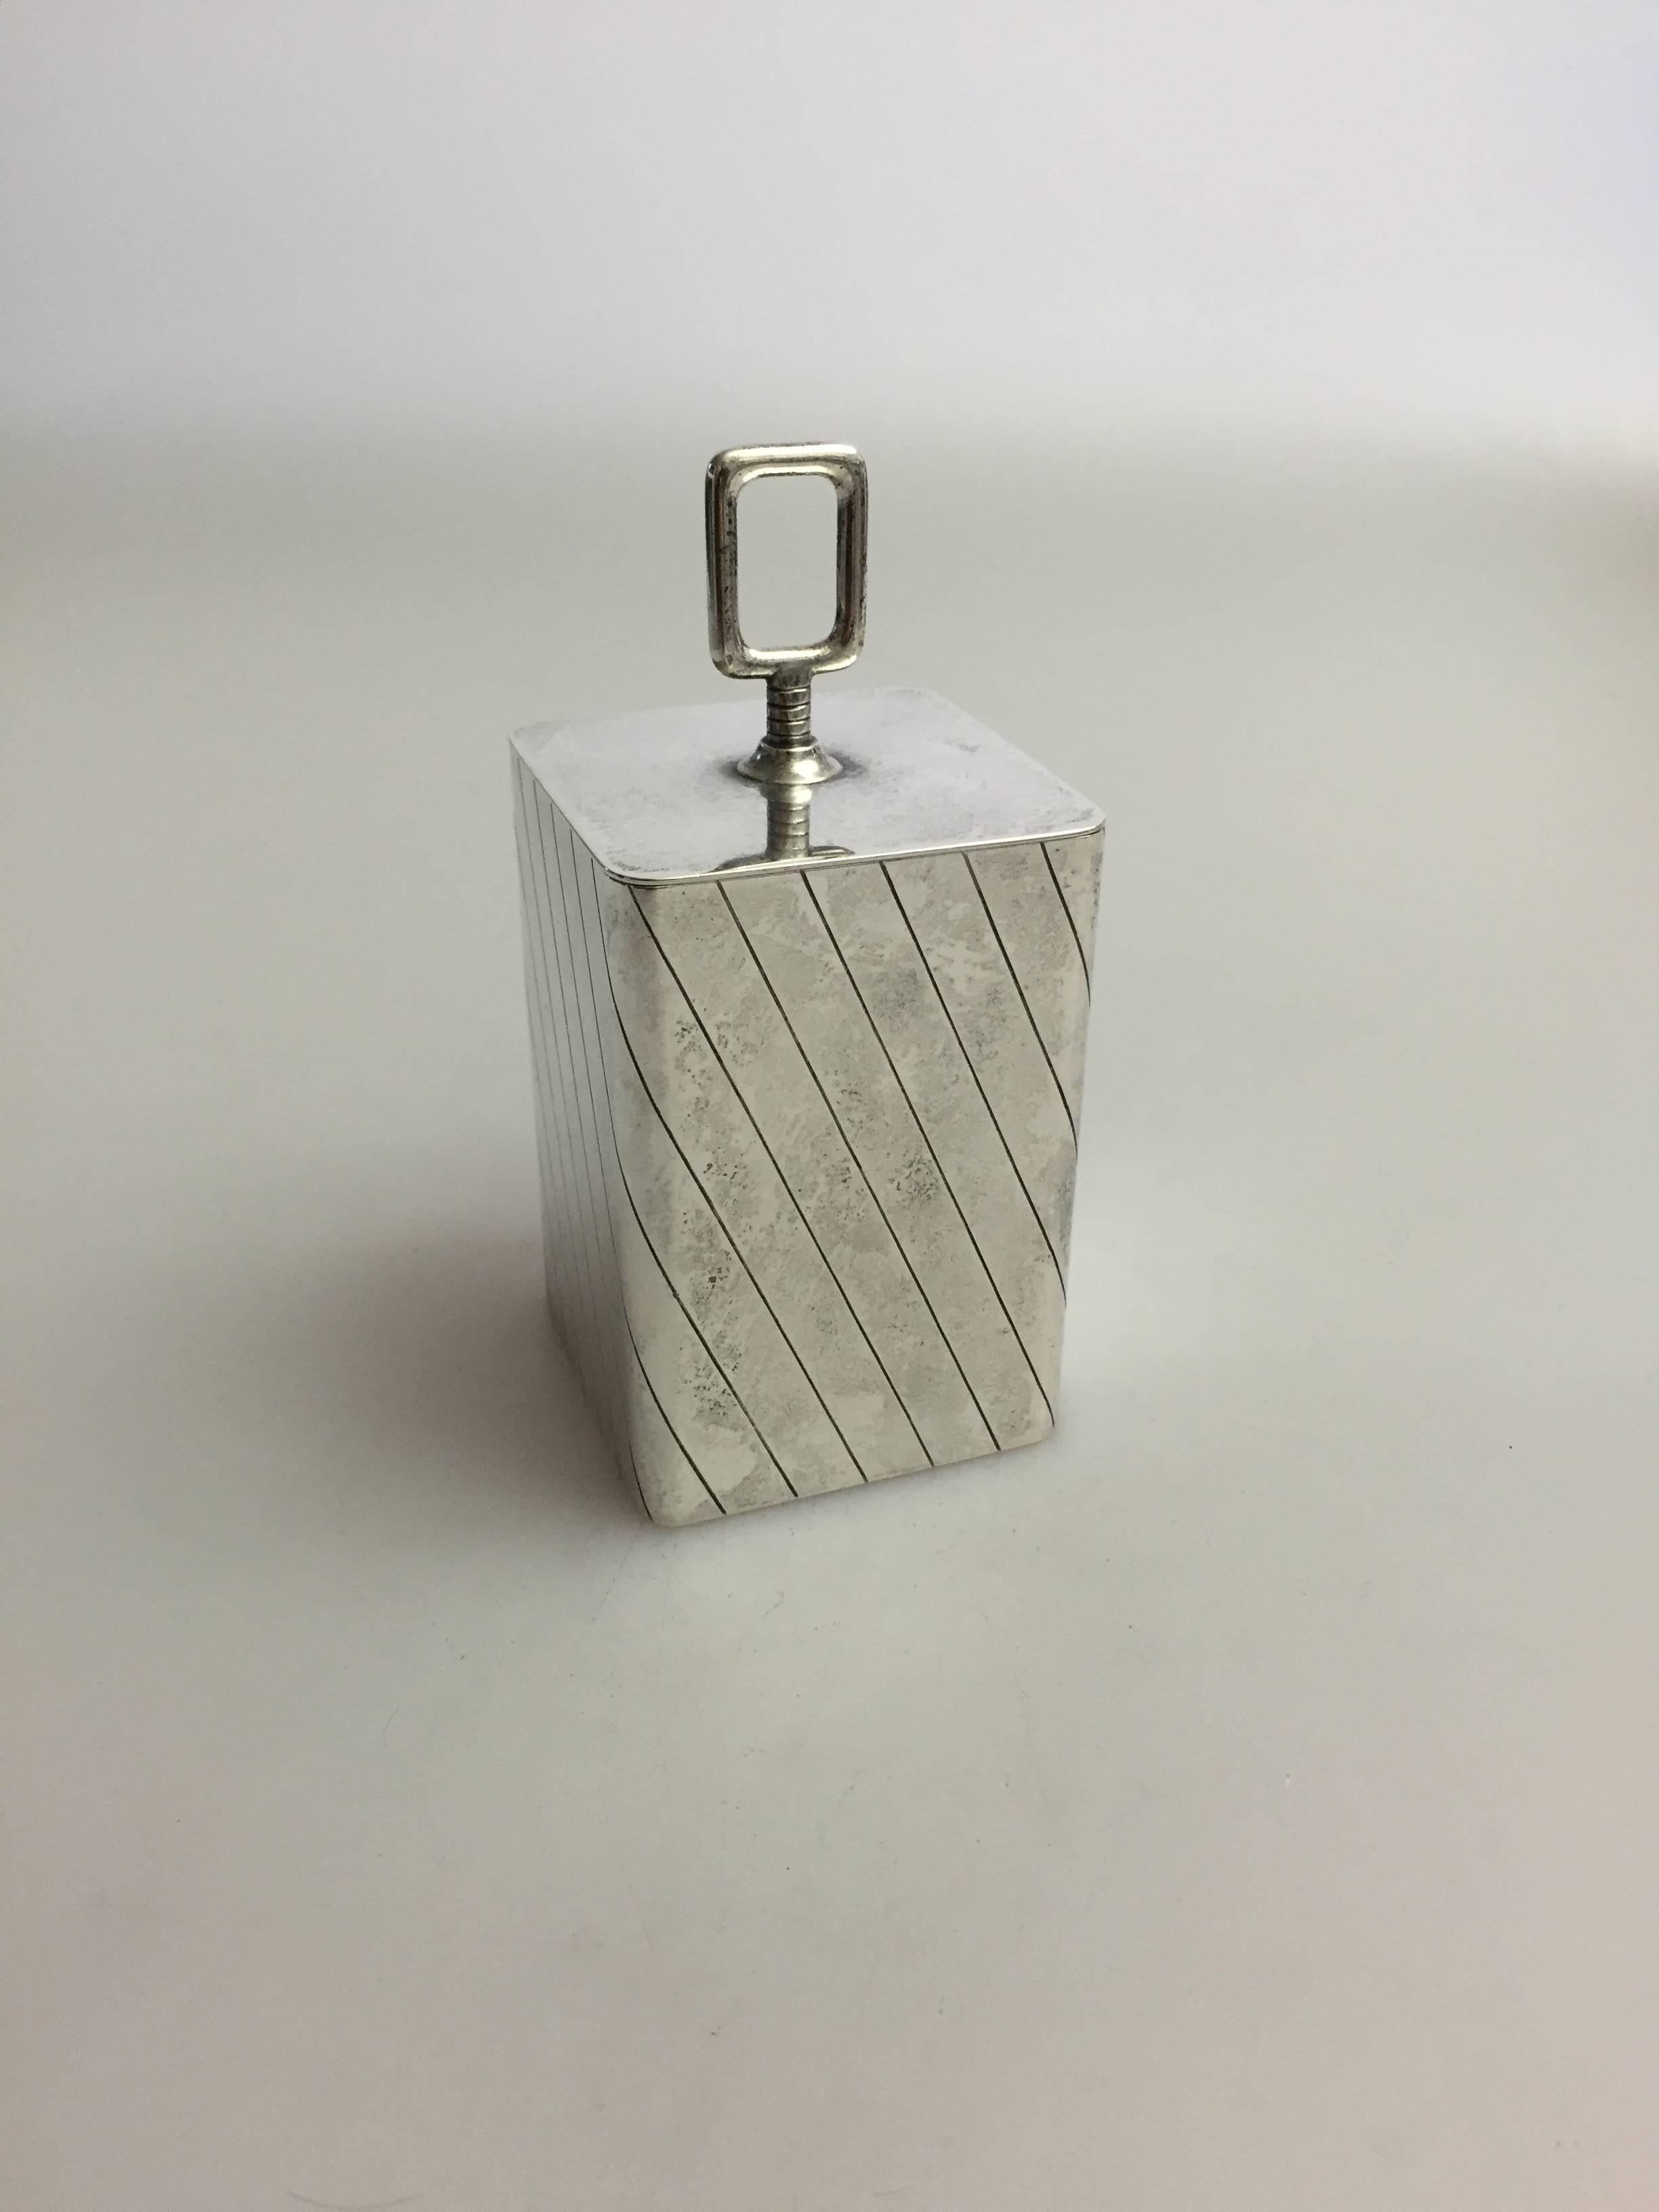 Georg Jensen sterling silver tobacco holder #913 by Sigvard Bernadotte, from after 1945.

 Measures: 13.5 cm H and 6.5cm W.
 Weighs 299 g / 10.55 oz.